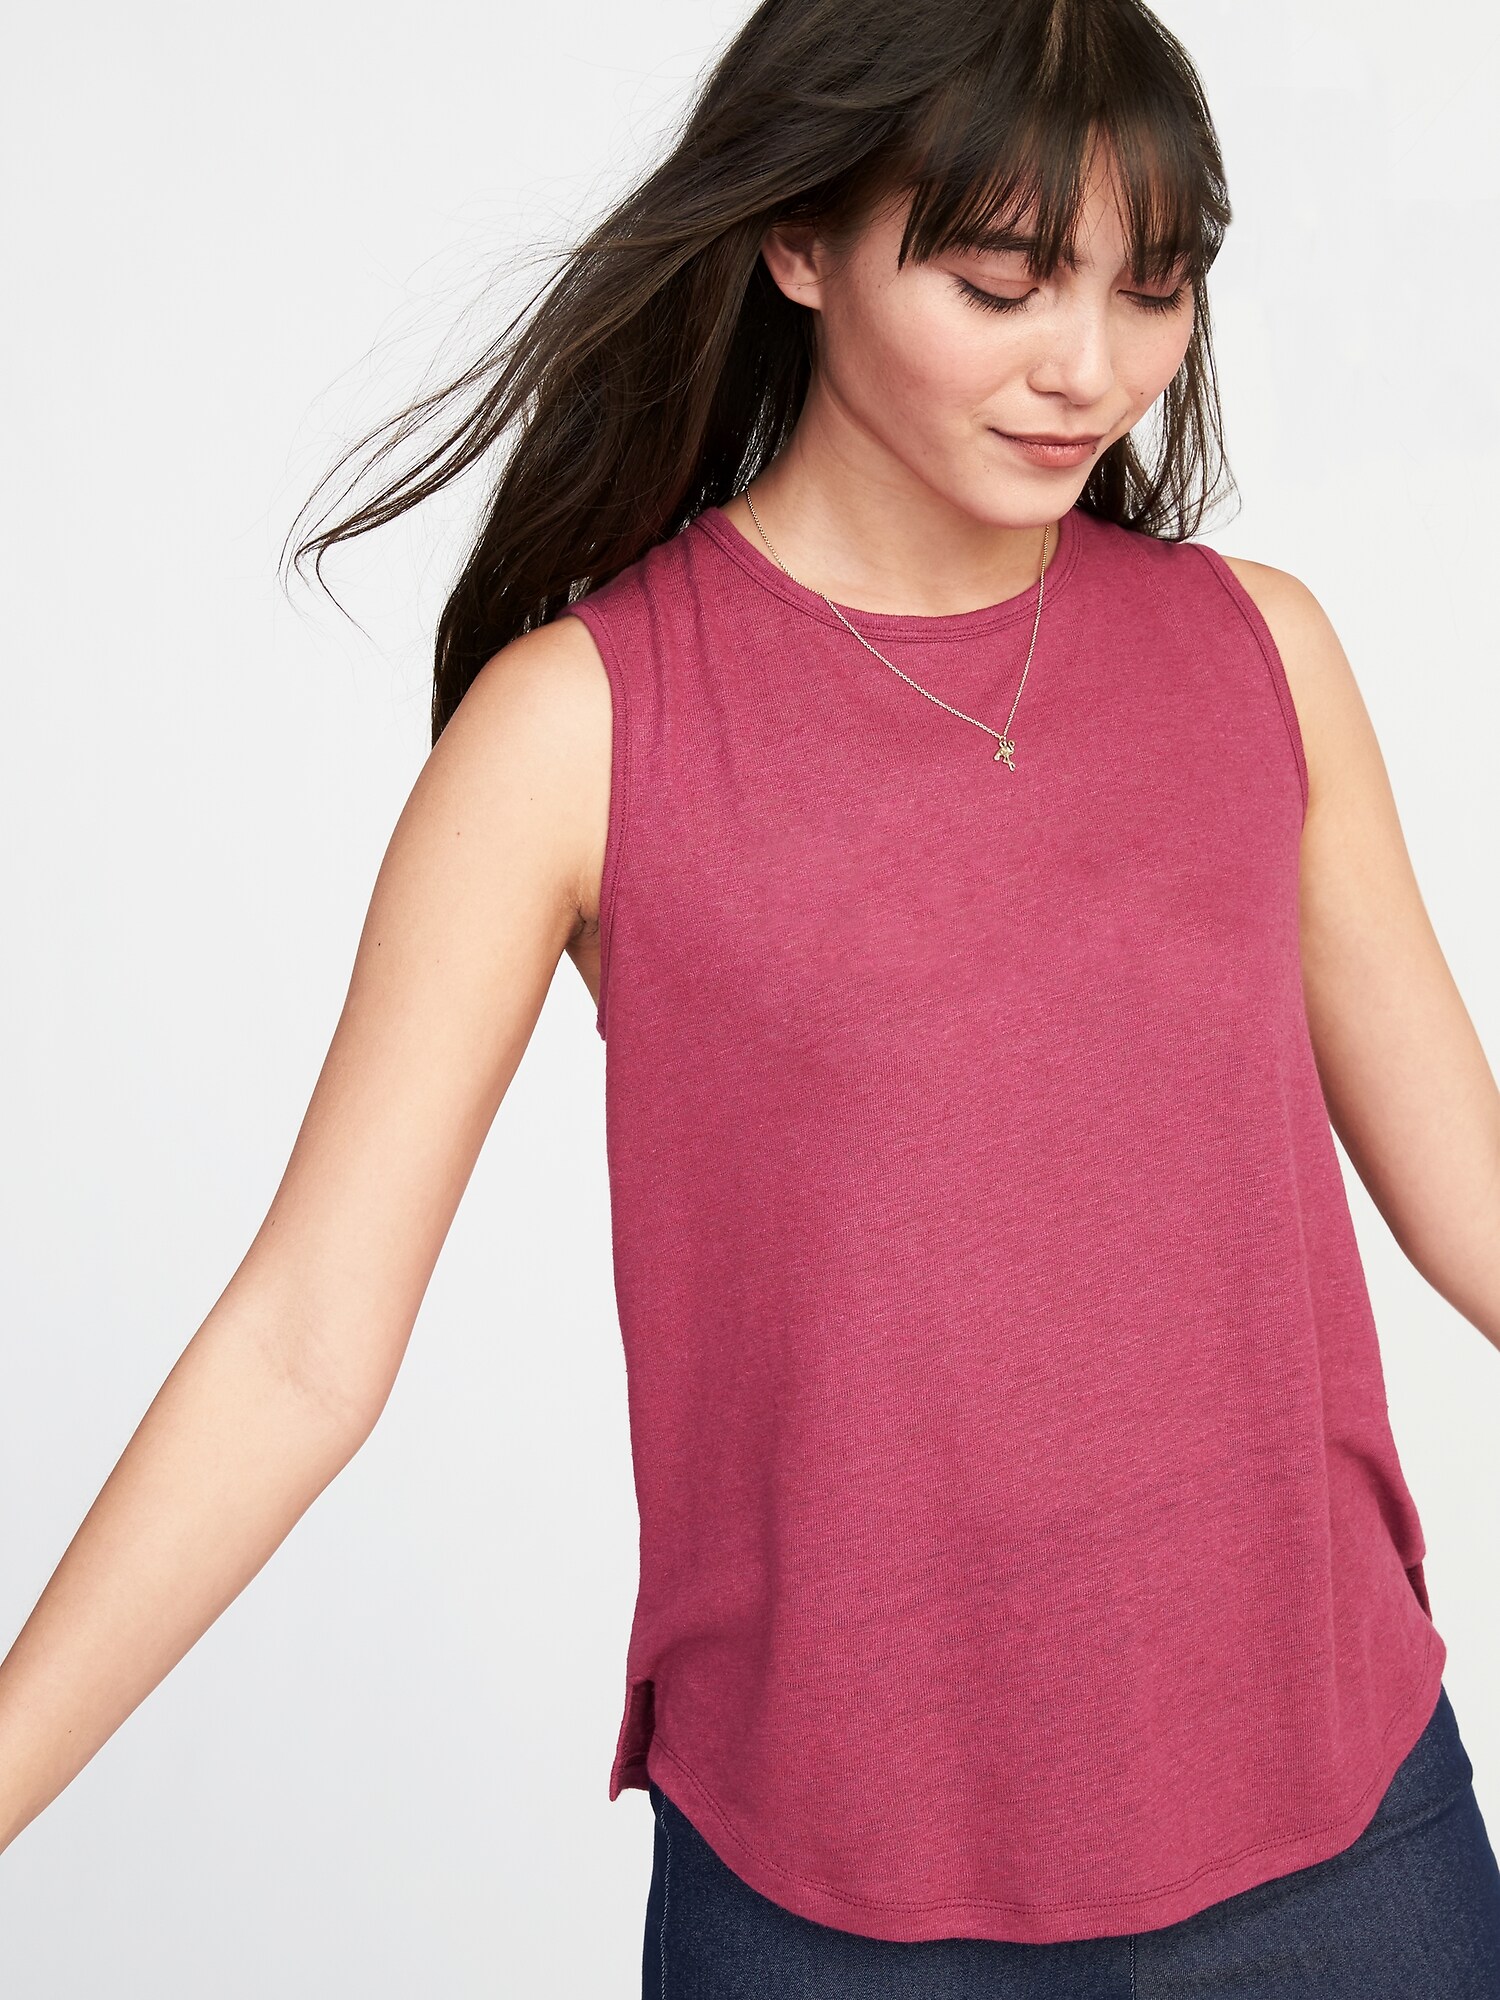 Relaxed Sleeveless Tie-Back Top for Women | Old Navy